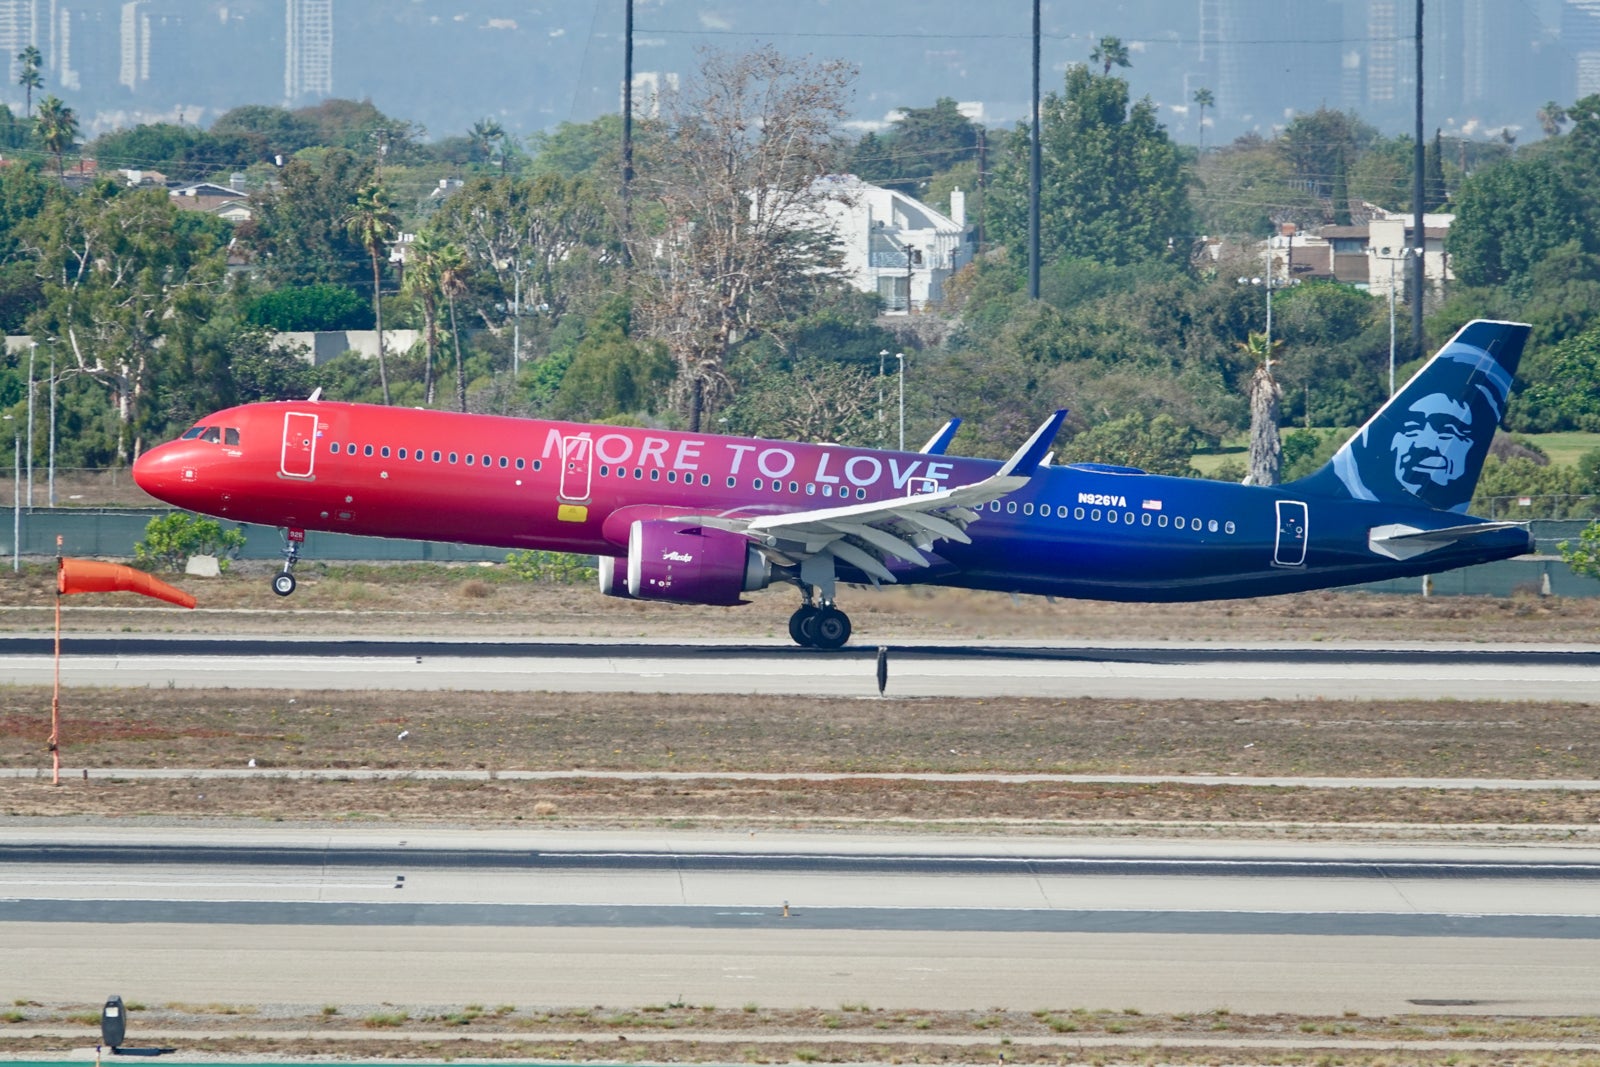 Planes Los Angeles LAX Zach Griff 41 ?width=1920